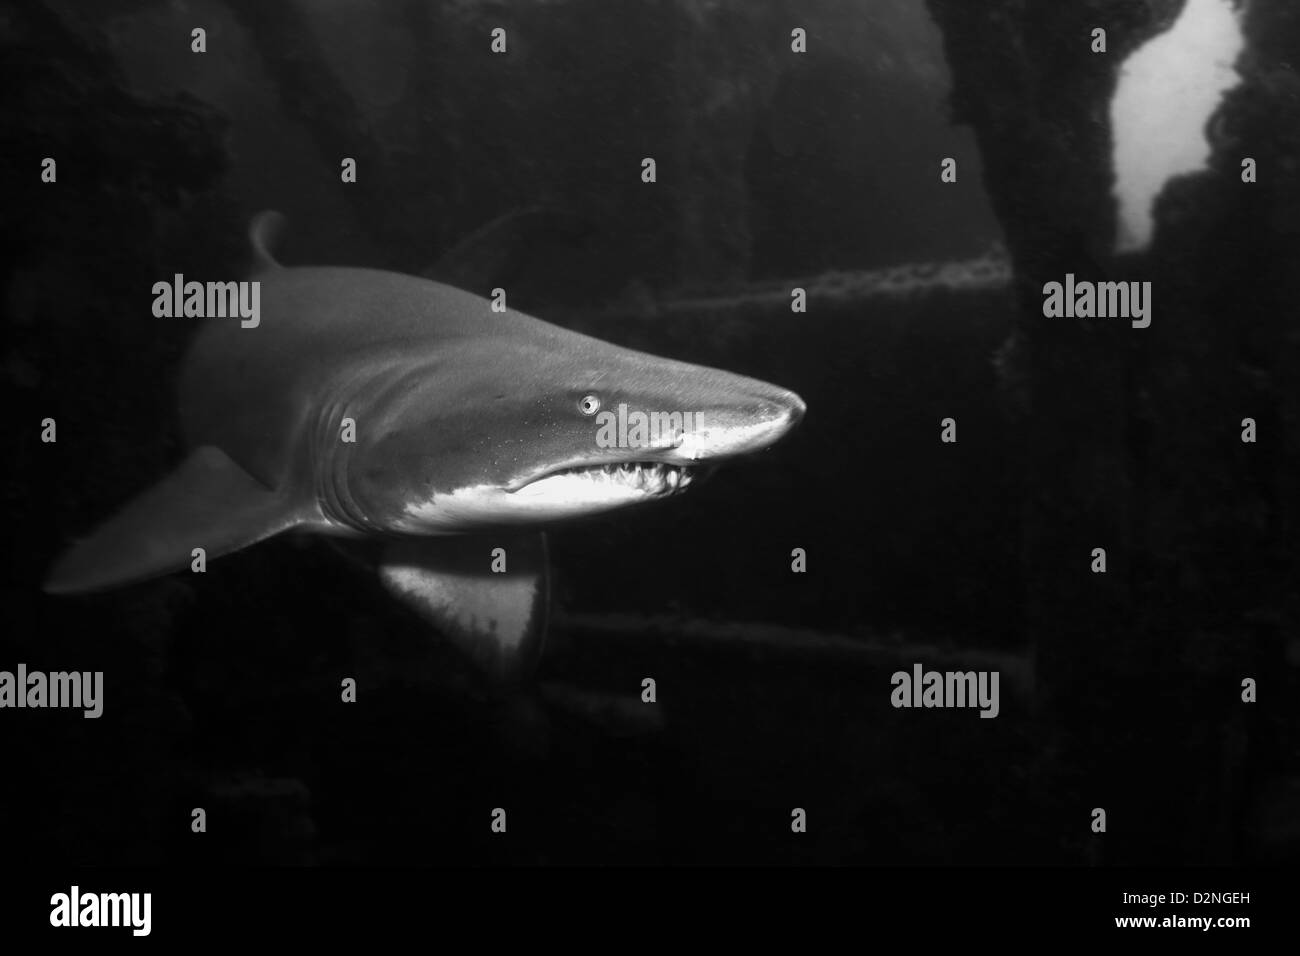 A Sand Tiger Shark swims quickly inside a shipwreck off of North Carolina, USA. In black and white. Stock Photo